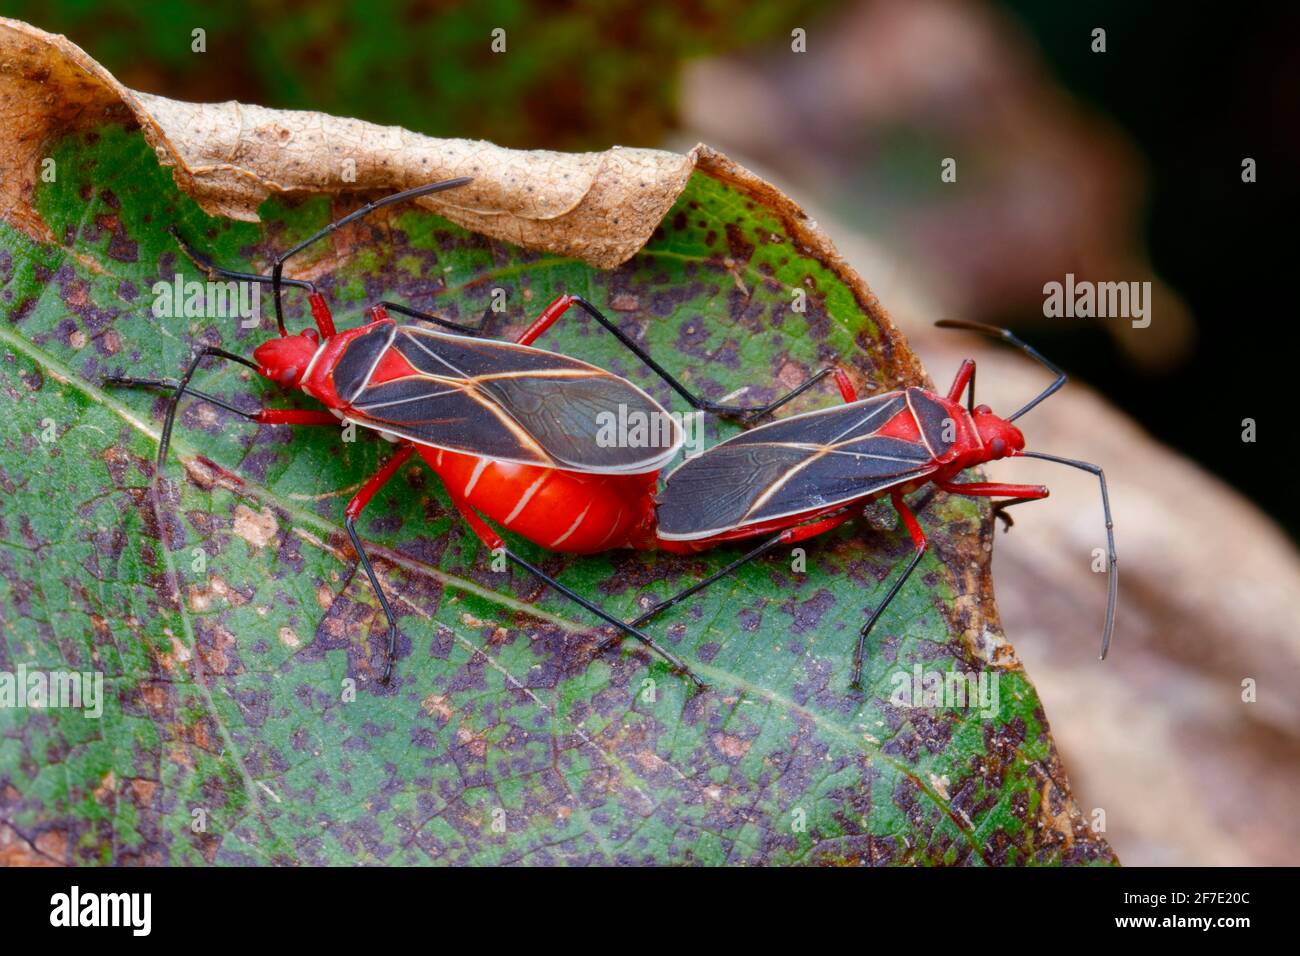 Mating adult cotton stainers, Dysdercus suturellus, on a cotton leaf. Stock Photo